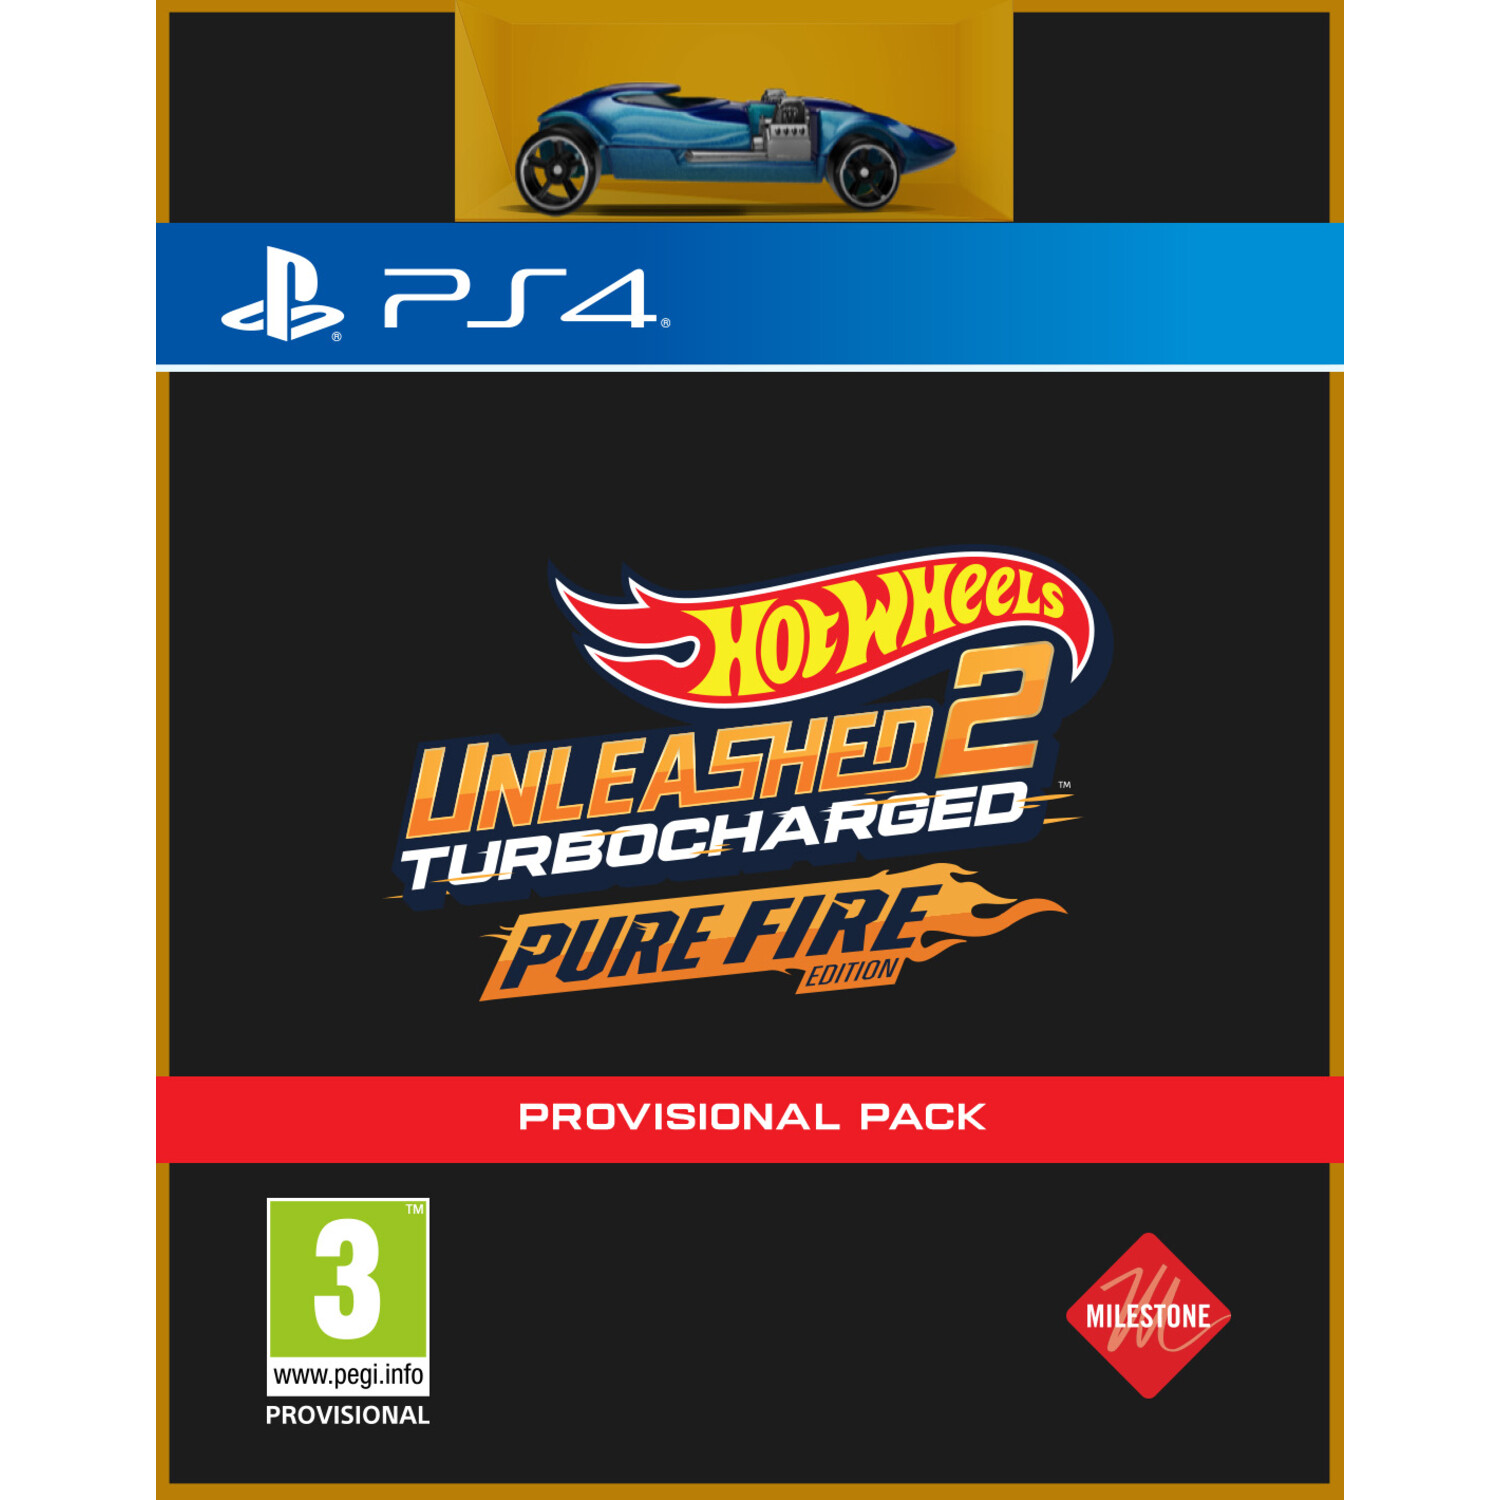 PS4 Hot 2: Wheels Unleashed Turbocharged Pure Edition - Fire